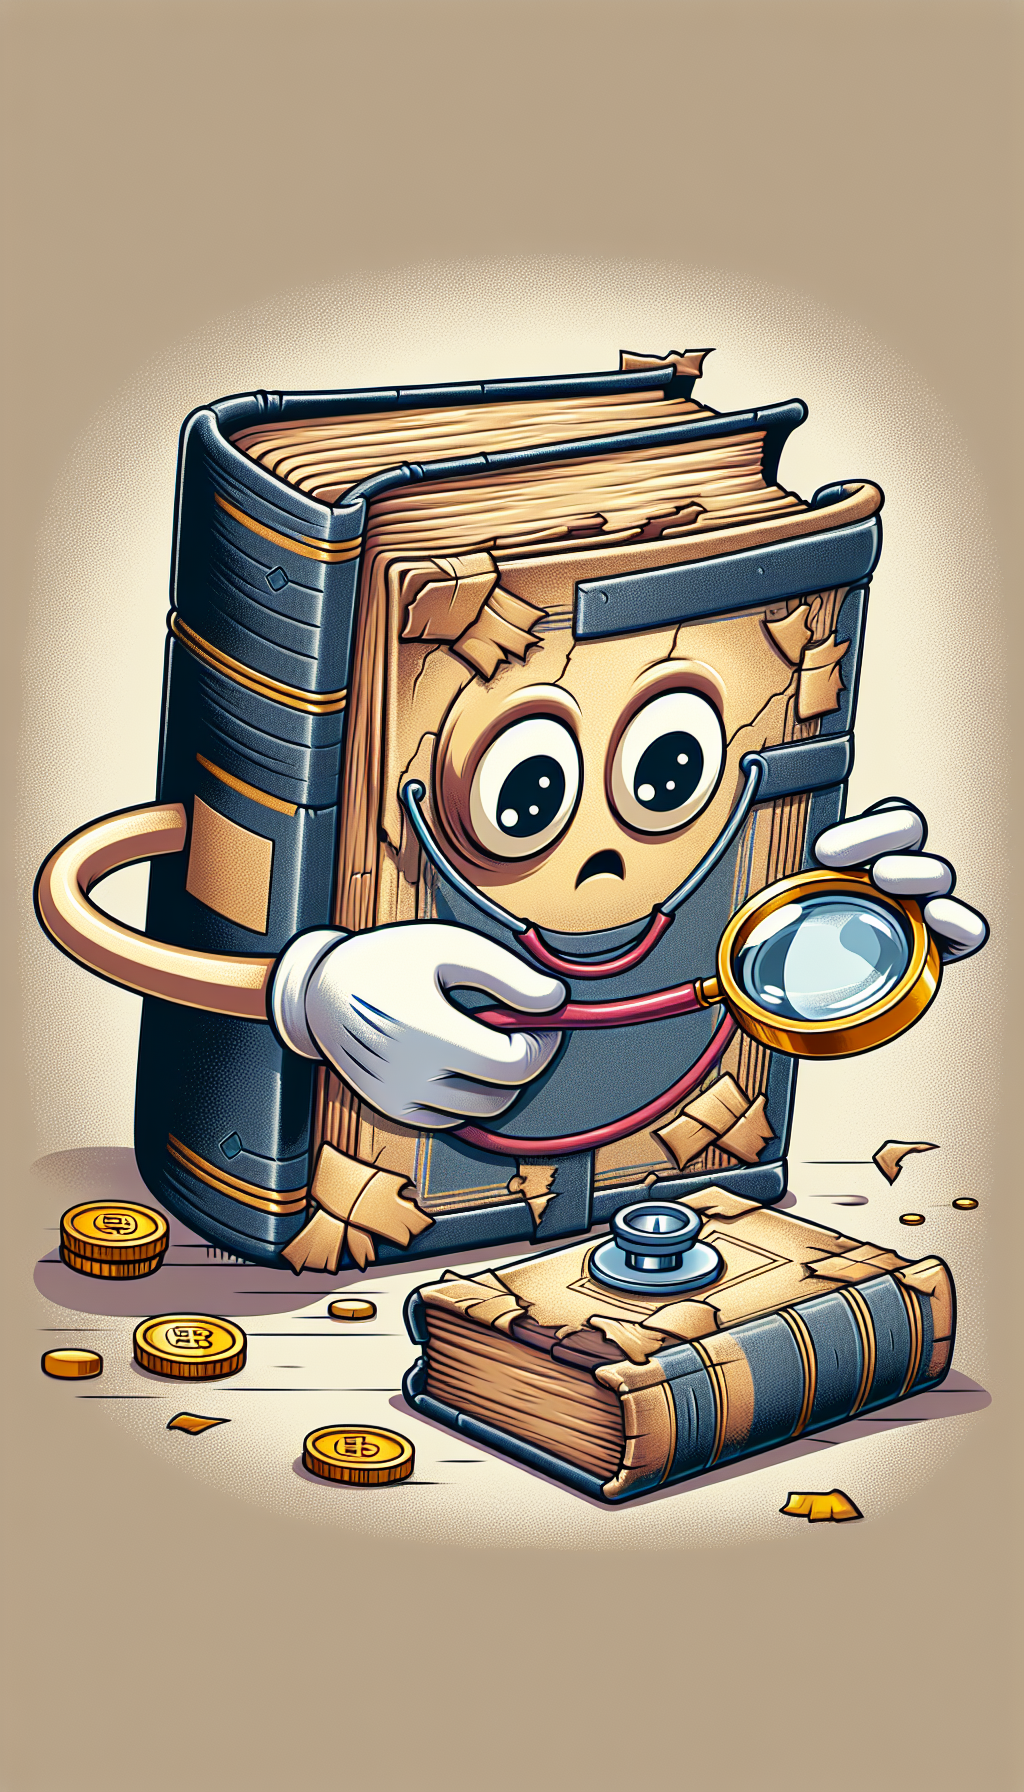 An anthropomorphic old book wears a stethoscope around its neck, its cover slightly frayed, examining a smaller, tattered book on a pedestal. A magnifying glass hovers above, highlighting a "well-loved" spine, while golden coins spill from the pages, suggesting the hidden value within its weathered appearance. This mix of cartoon and realism subtly emphasizes both the condition and intrinsic worth of old books.